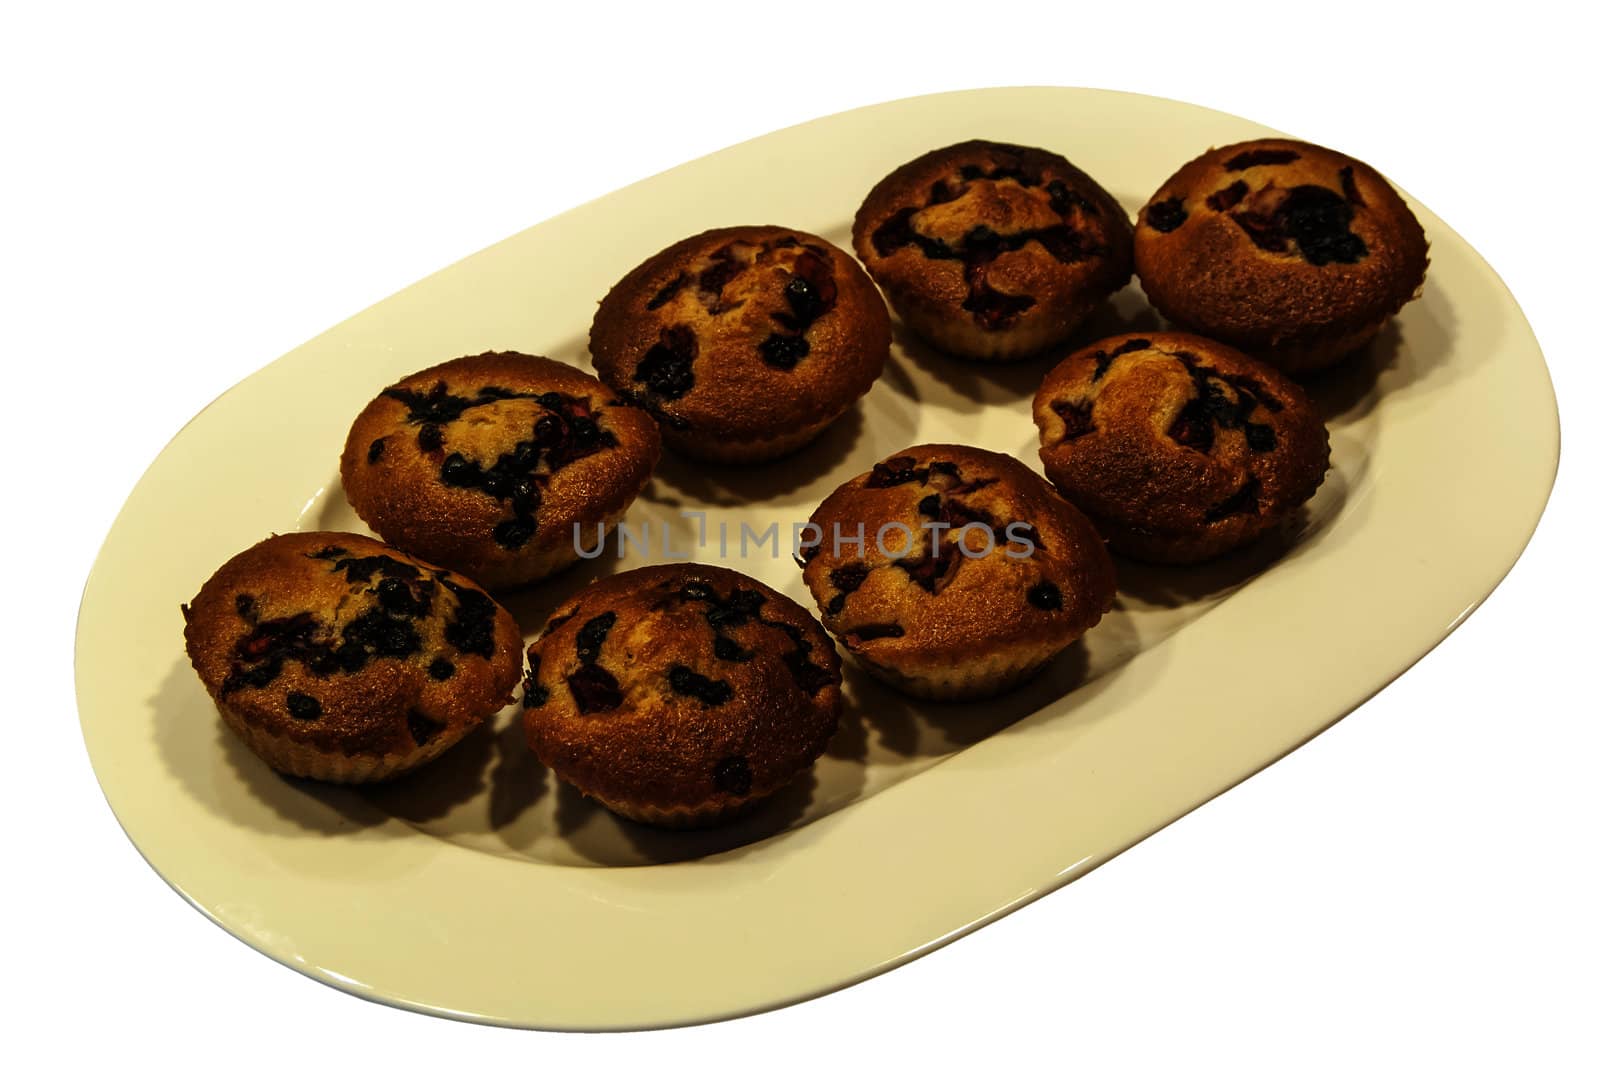 Homemade muffins on plate by varbenov